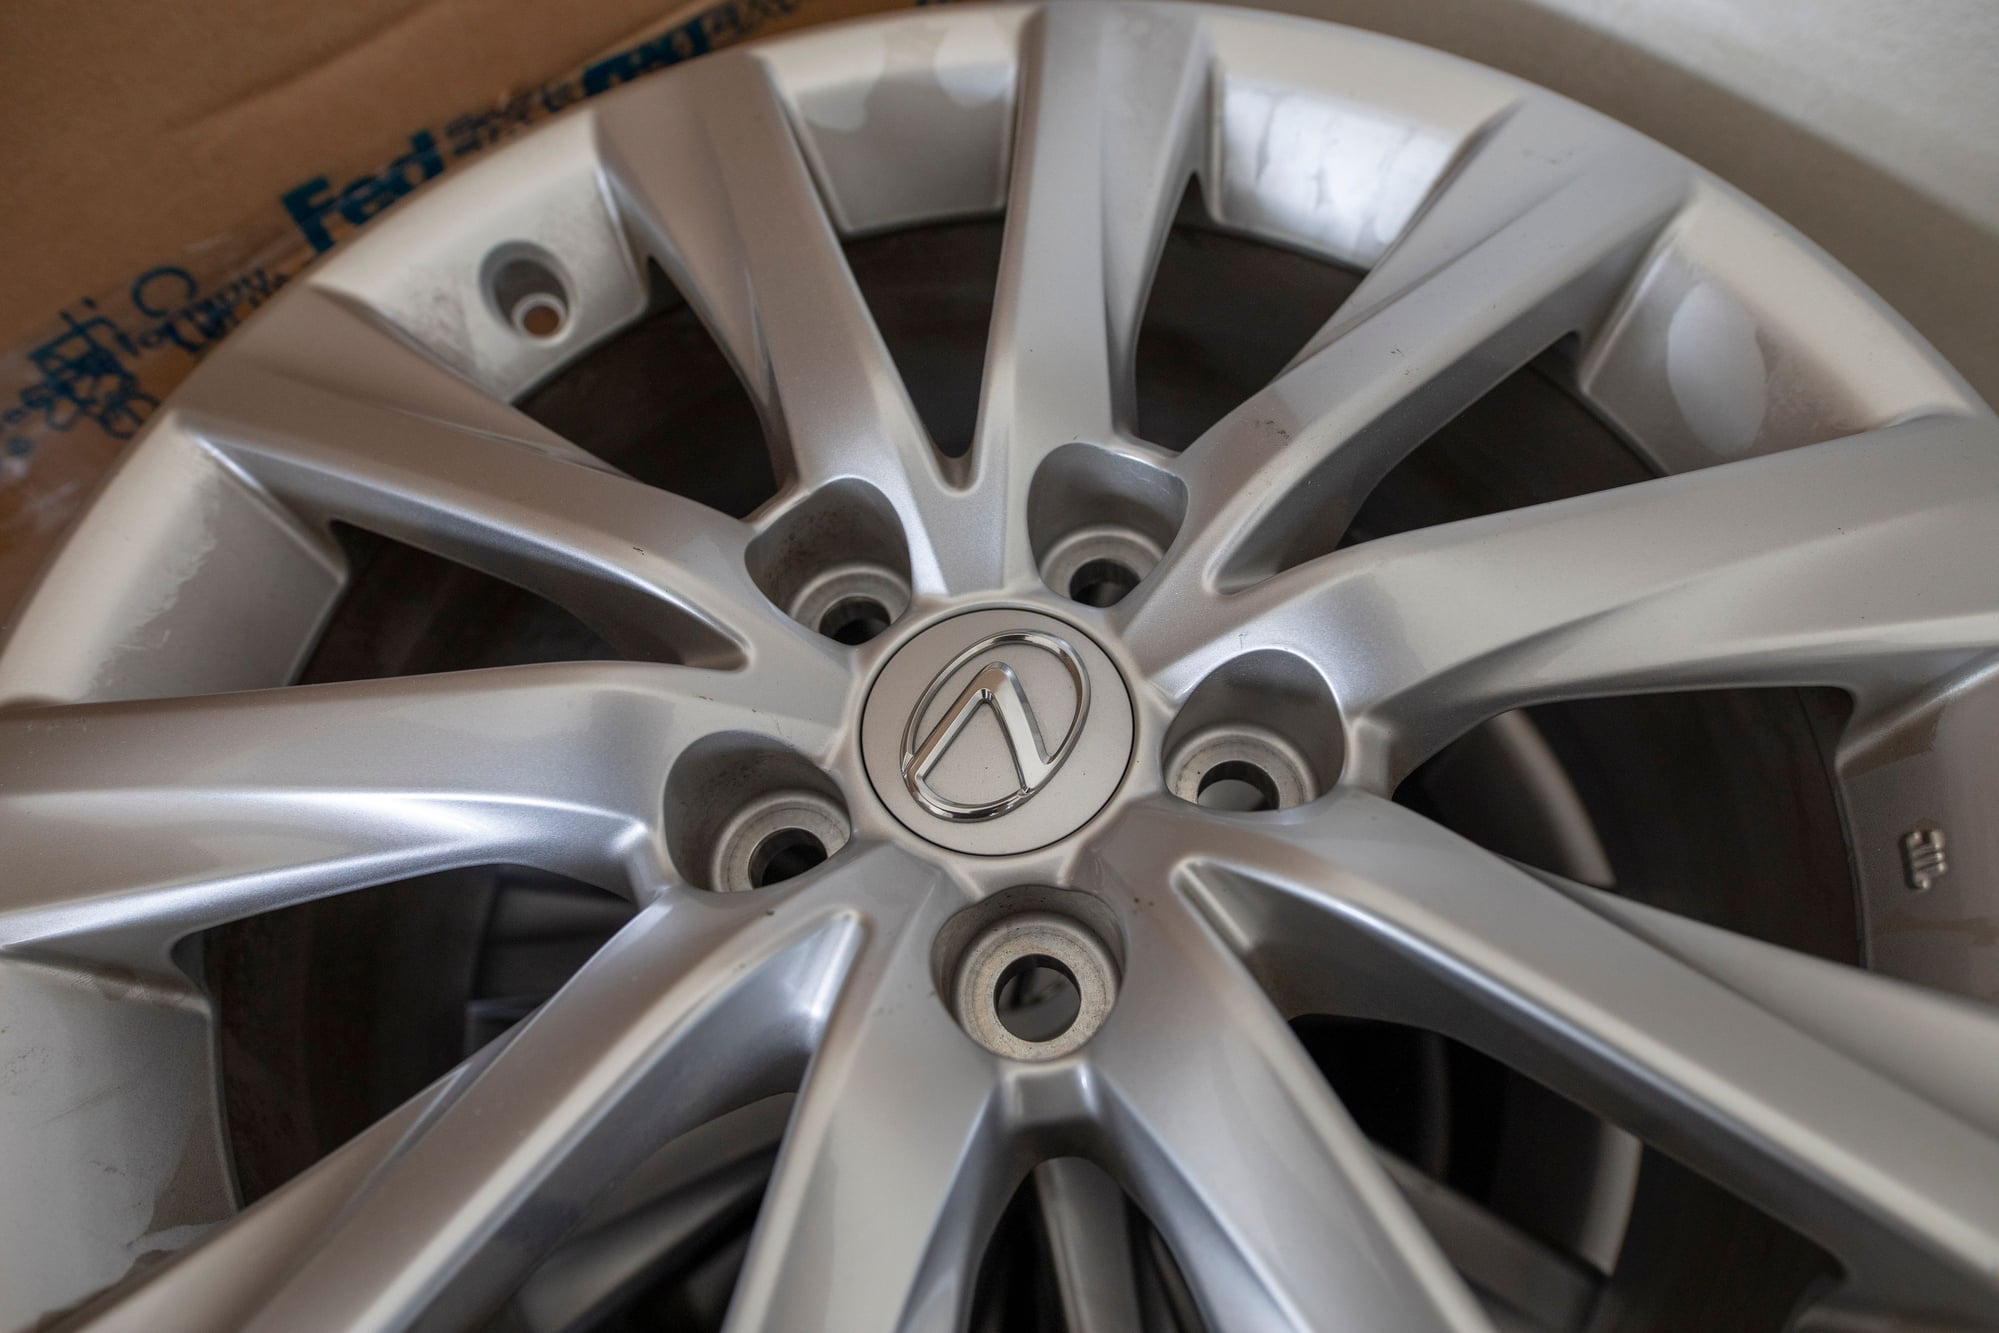 Wheels and Tires/Axles - 2015 3rd Generation Lexus IS 250 OEM 17" Wheels - Used - 2013 to 2019 Lexus IS250 - Sacramento, CA 95823, United States